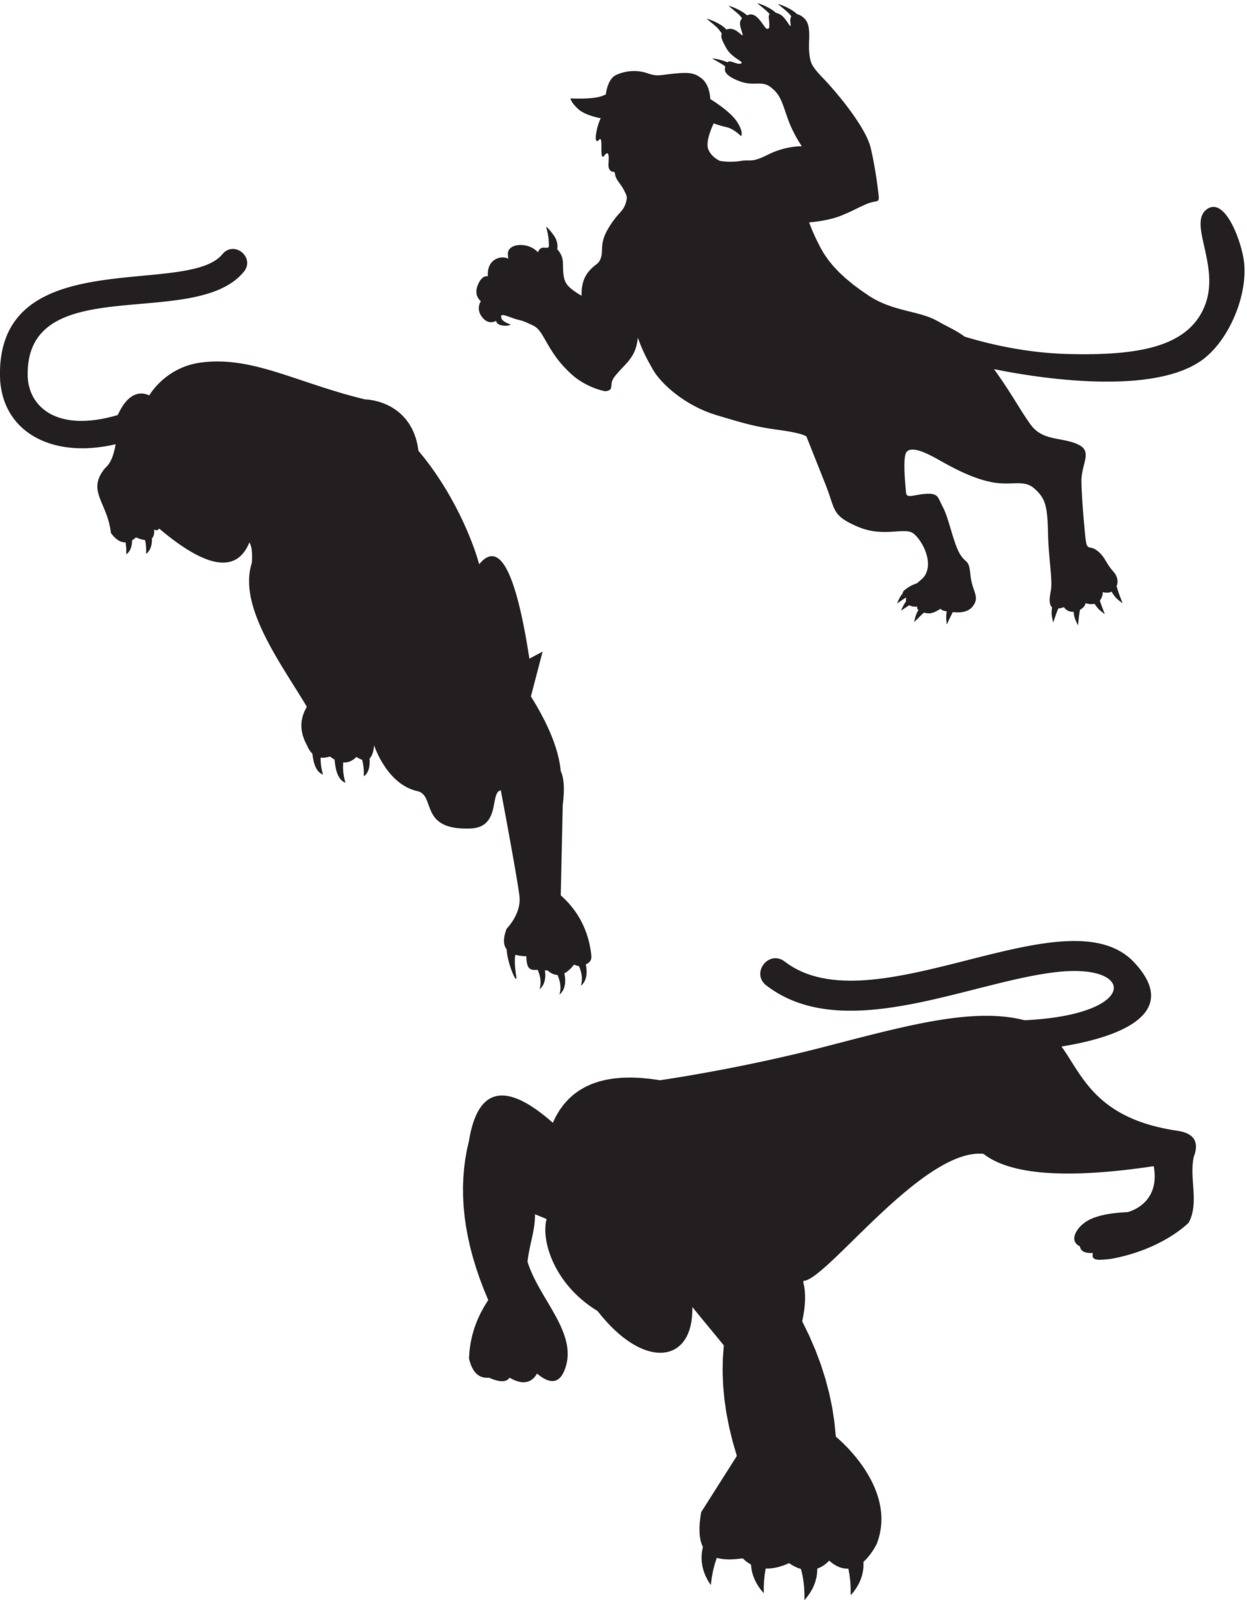 Illustration of wild feline animals silhouettes isolated on a white background.